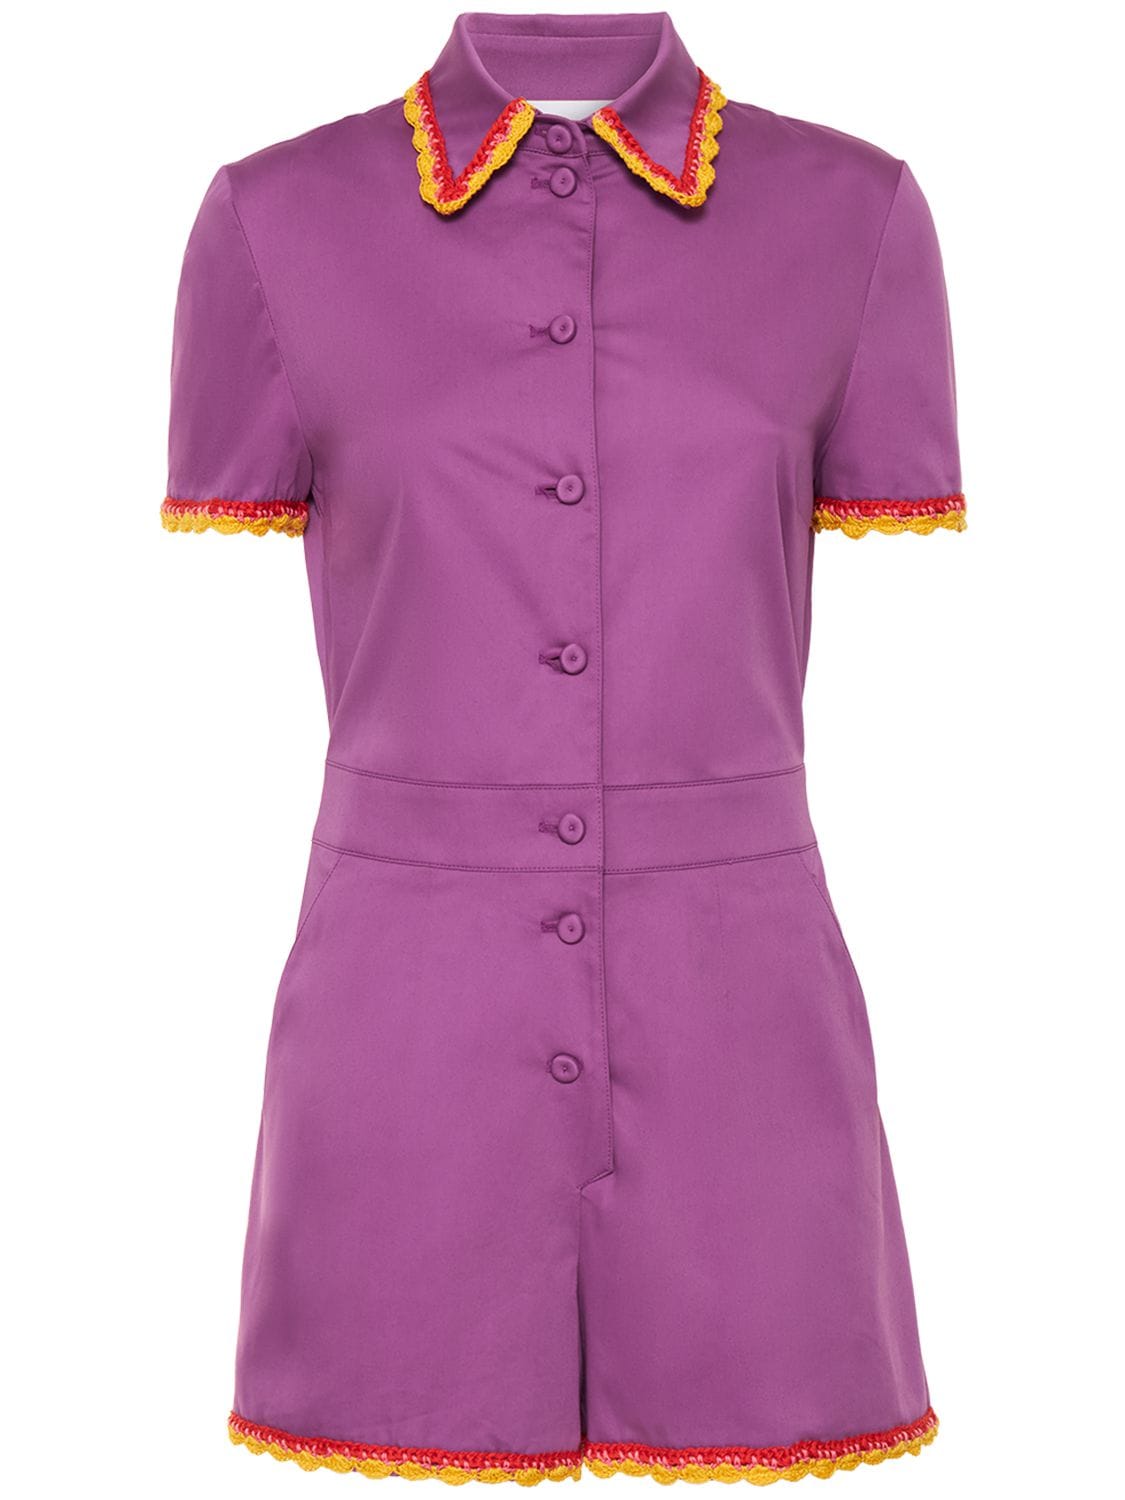 Moschino Cotton & Lace Trim Playsuit In Purple